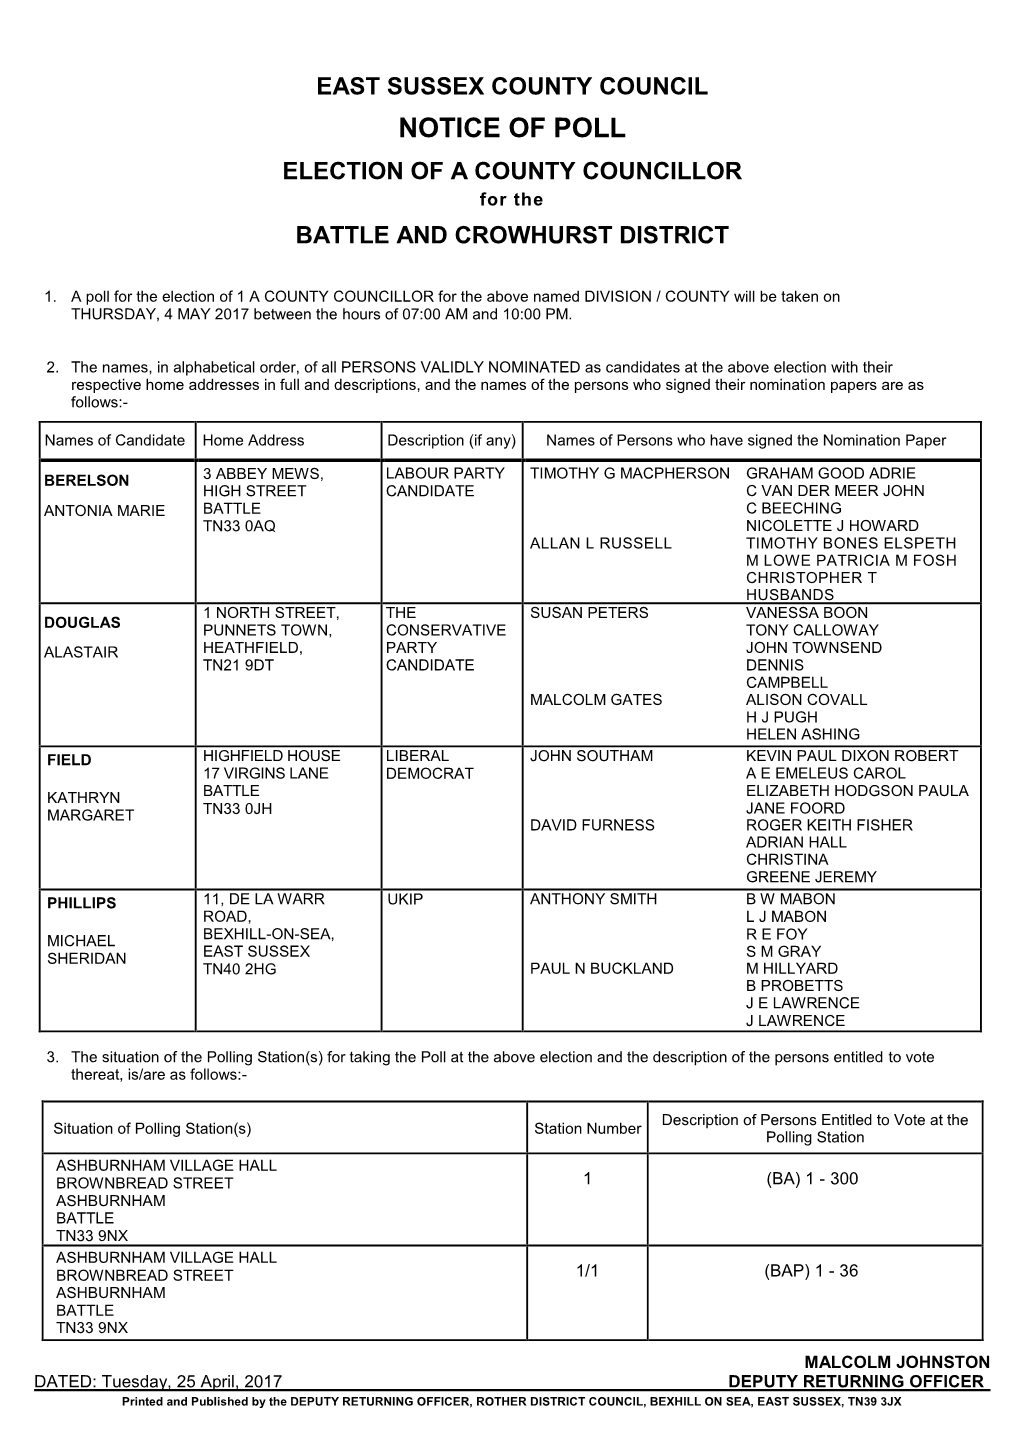 NOTICE of POLL ELECTION of a COUNTY COUNCILLOR for the BATTLE and CROWHURST DISTRICT